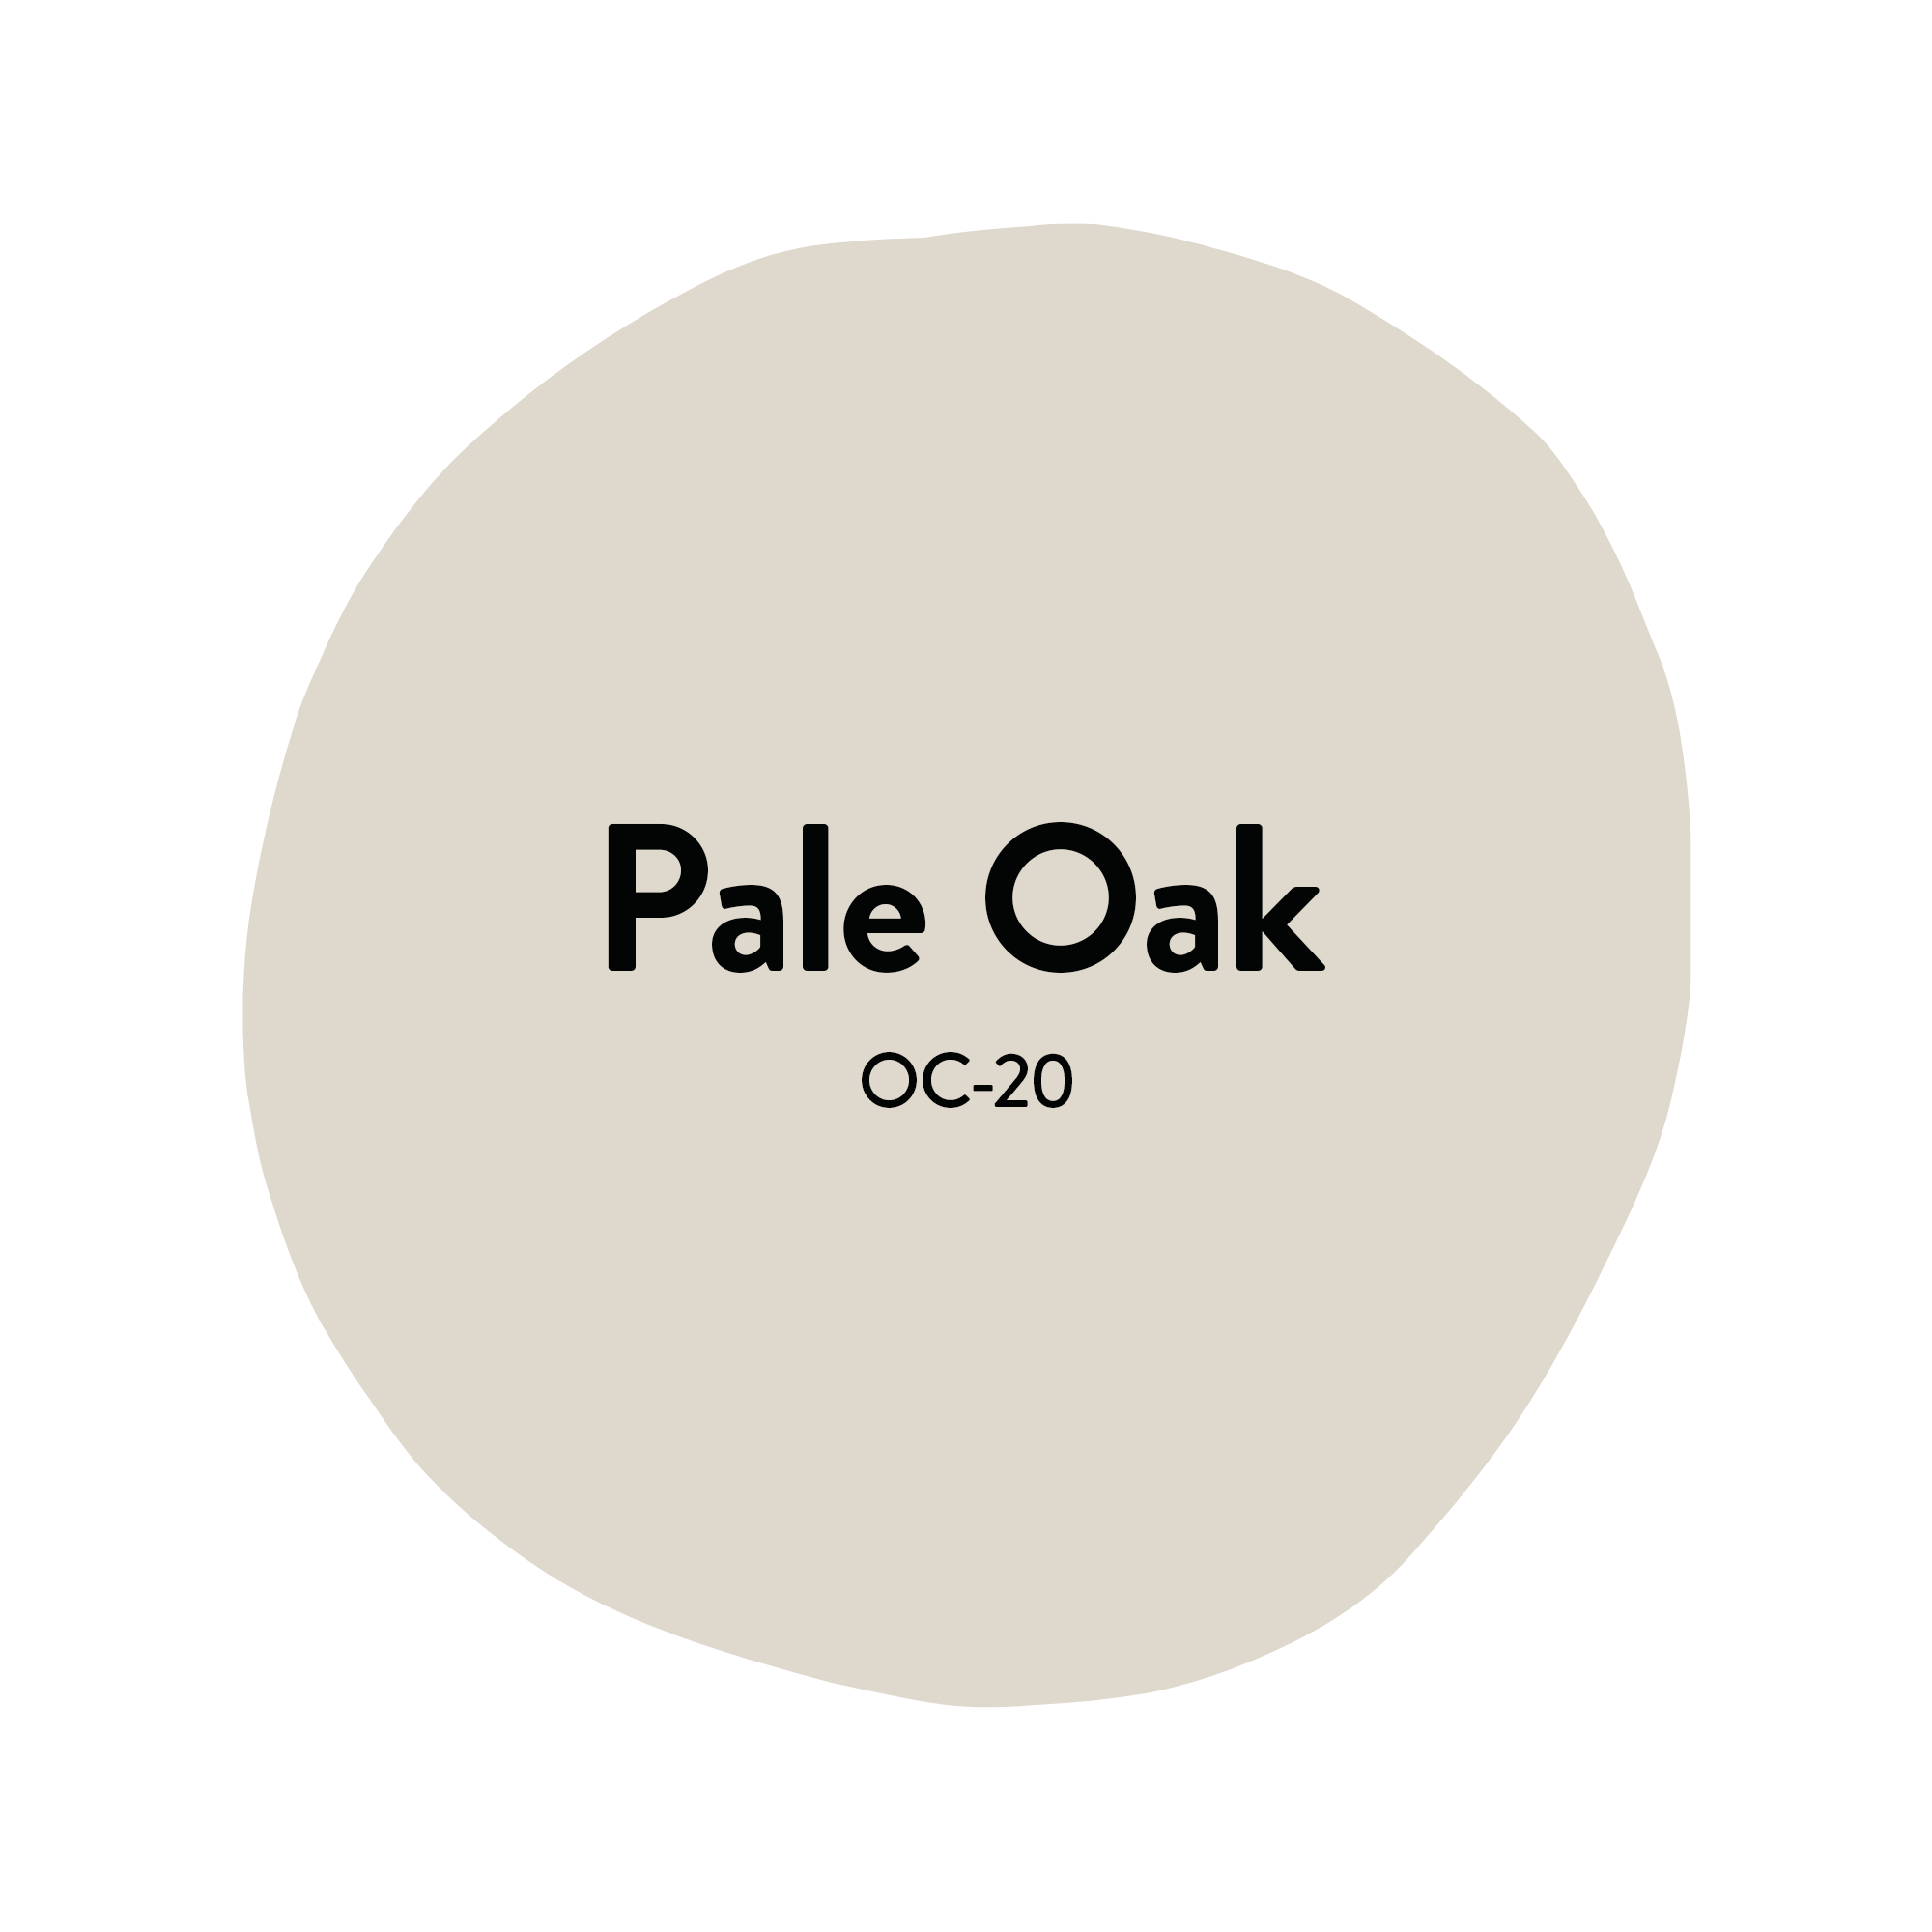 Benjamin Moore's Pale Oak - OC-20 Recommended by Sonja Pound